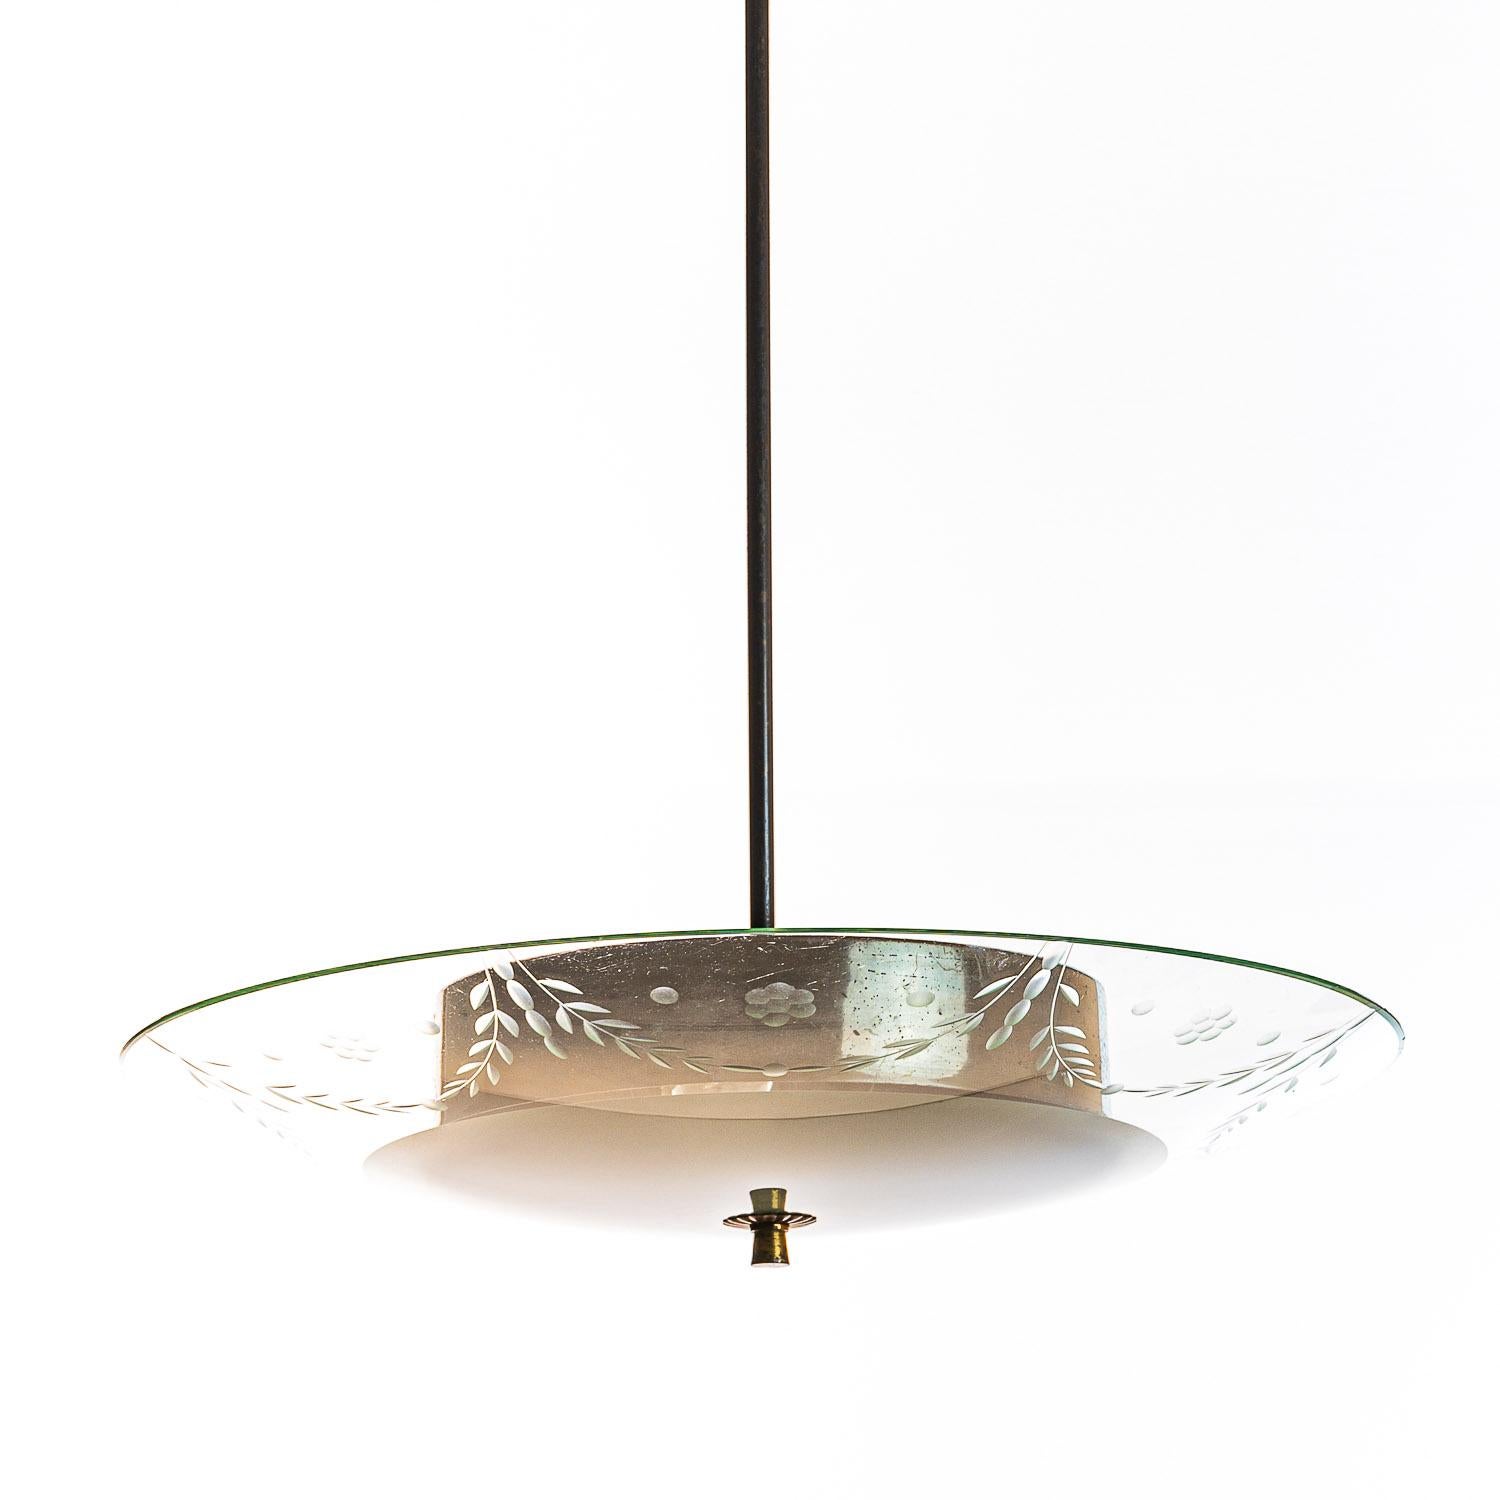 This elegant piece consisting of a brass frame and a unique frosted and satin glass reflector. 
The round curved glass reflector partially etched with floral motifs mounts below a round metal piece to conceal the bulbs. In the center 2 electrical